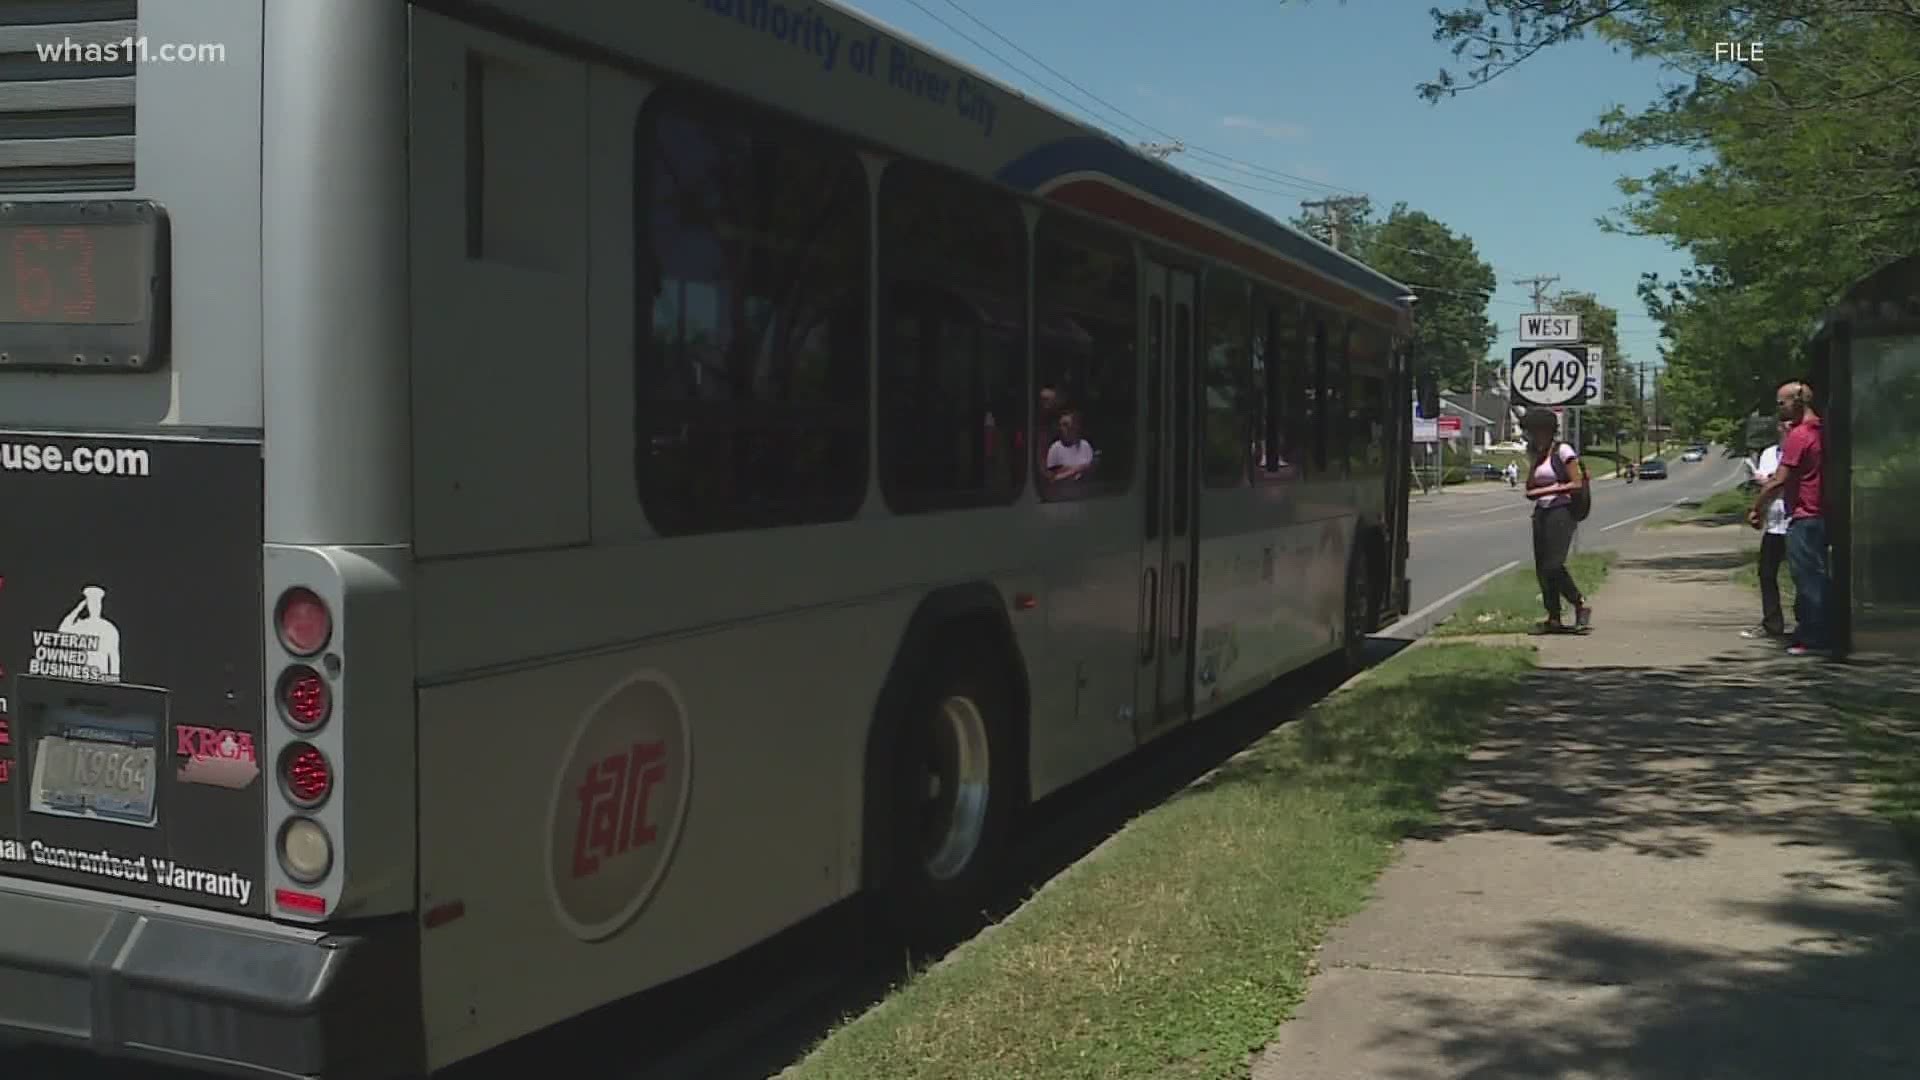 TARC says the operator last worked September 14  on route 23.